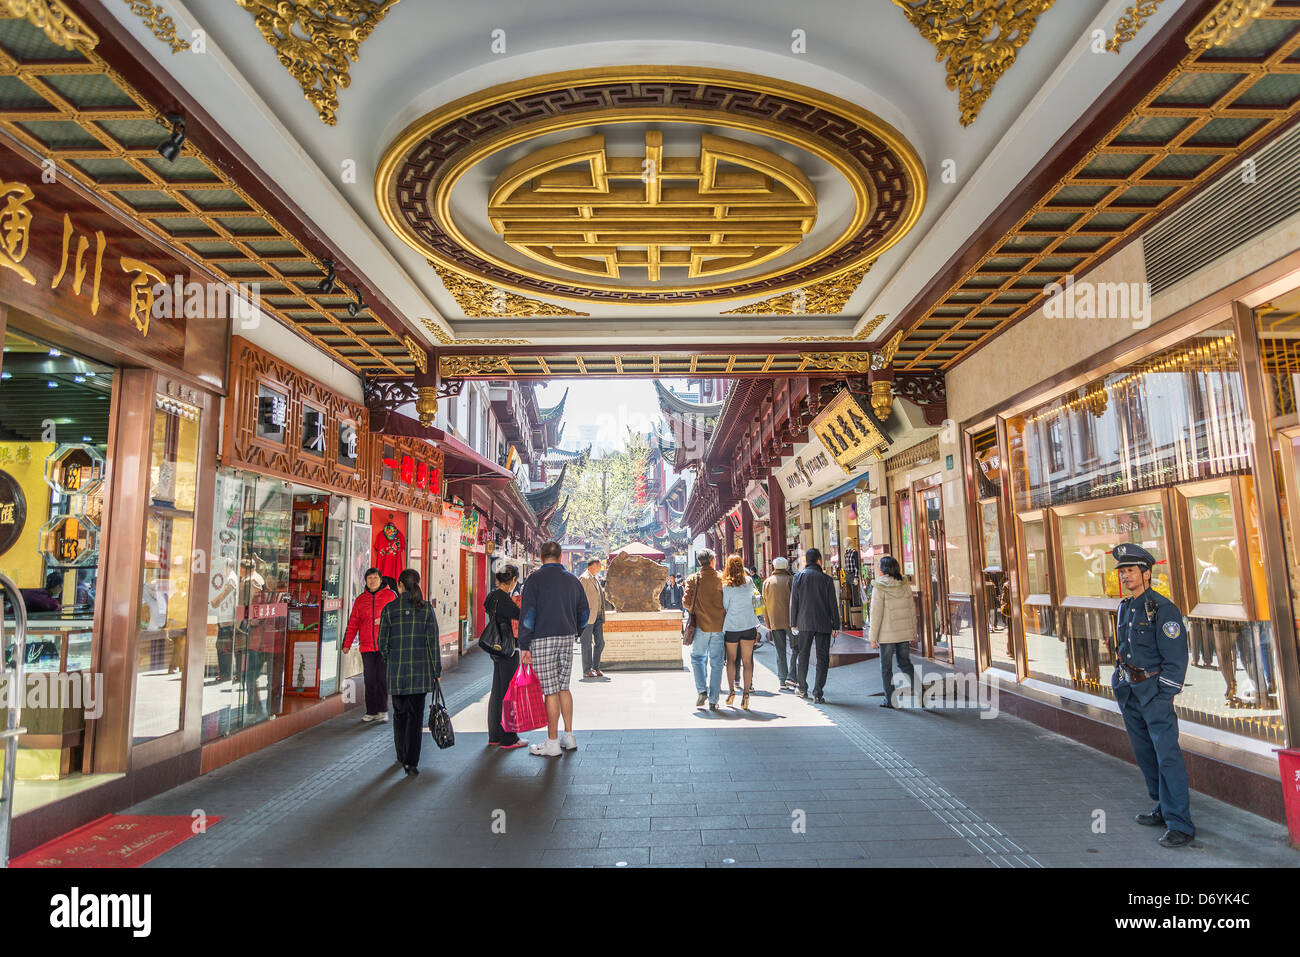 traditional architecture shopping area in shanghai china Stock Photo